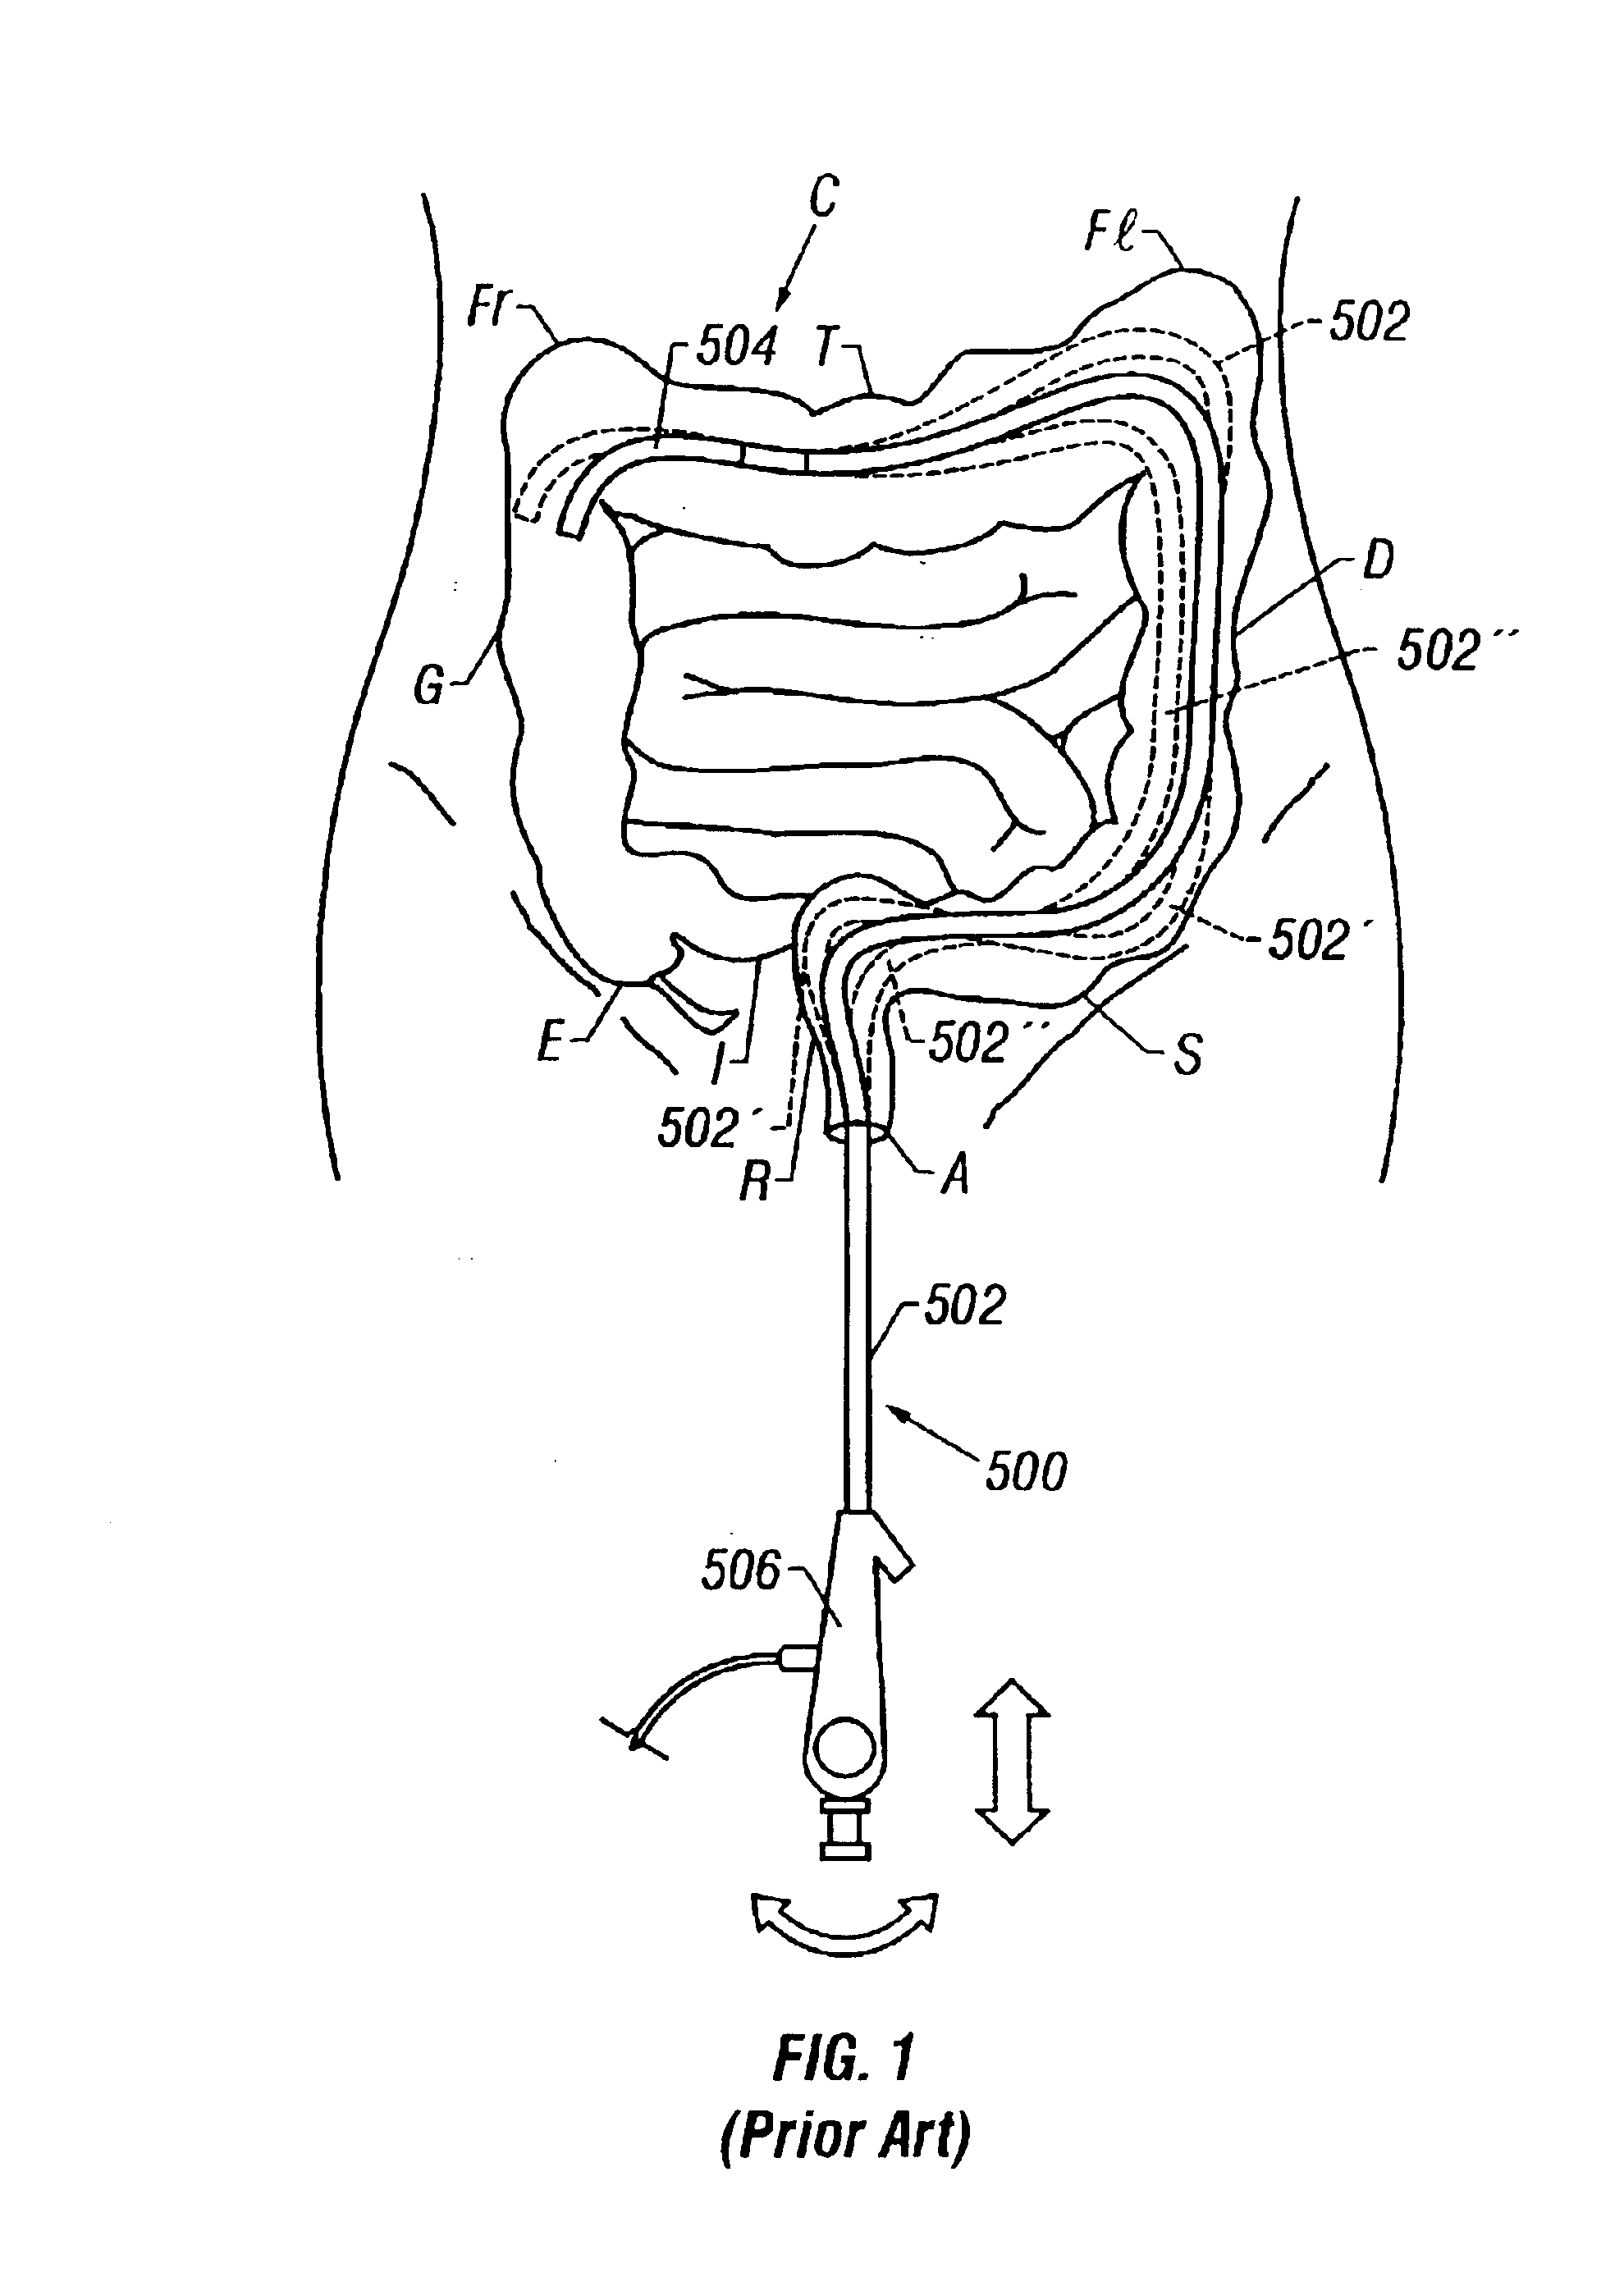 Steerable segmented endoscope and method of insertion